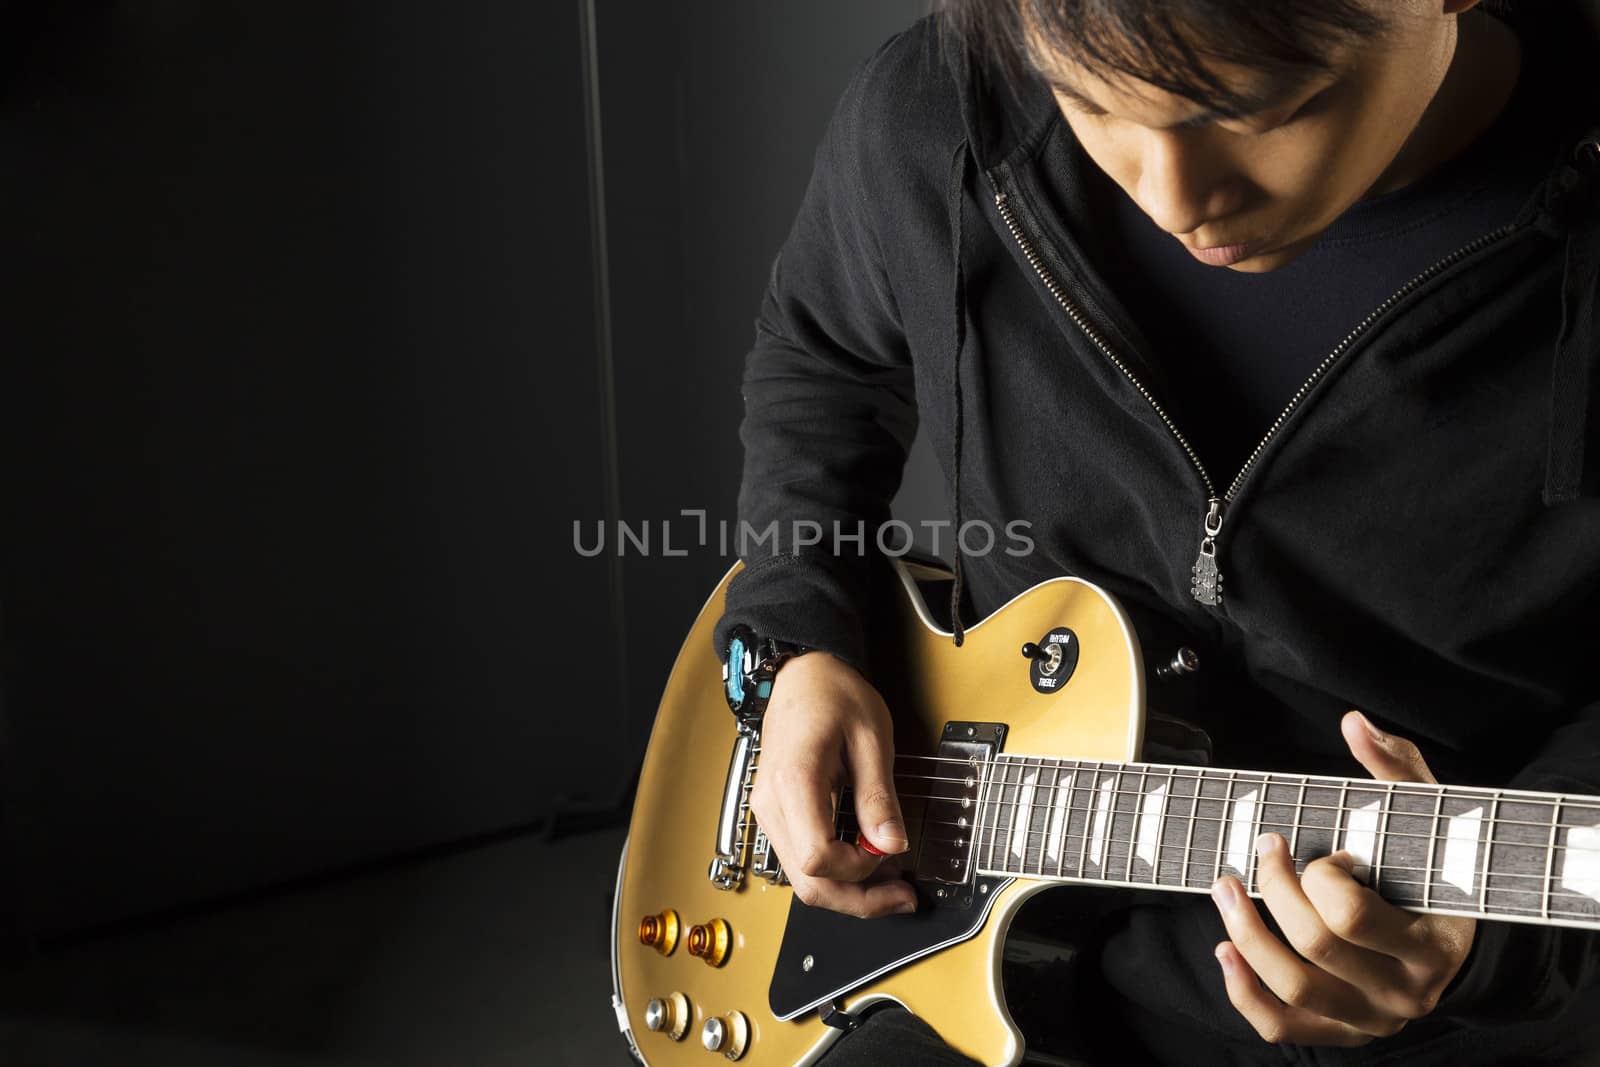 An Asian guitarist playing electric guitar with copy space on the left.